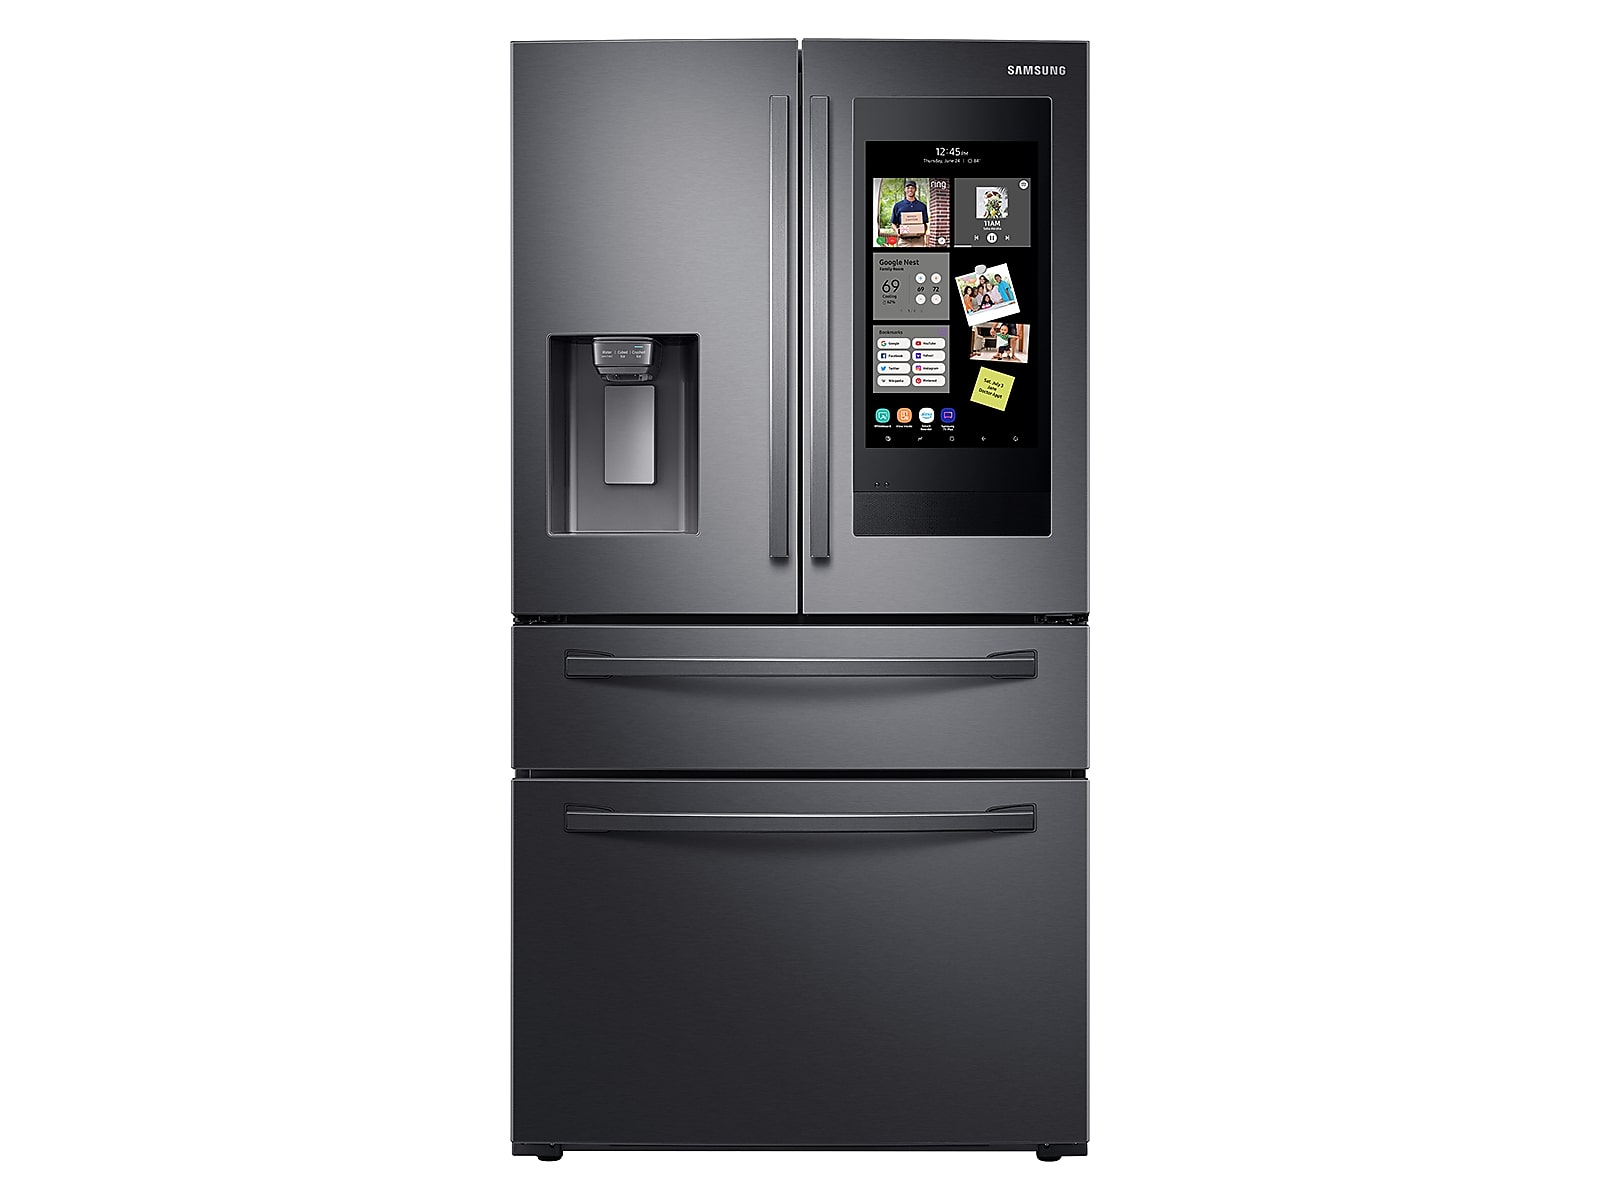 Samsung 28 cu. ft. 4-Door French Door Refrigerator with 21.5" Touch Screen Family Hub™ in Black Stainless Steel(RF28R7551SG/AA)